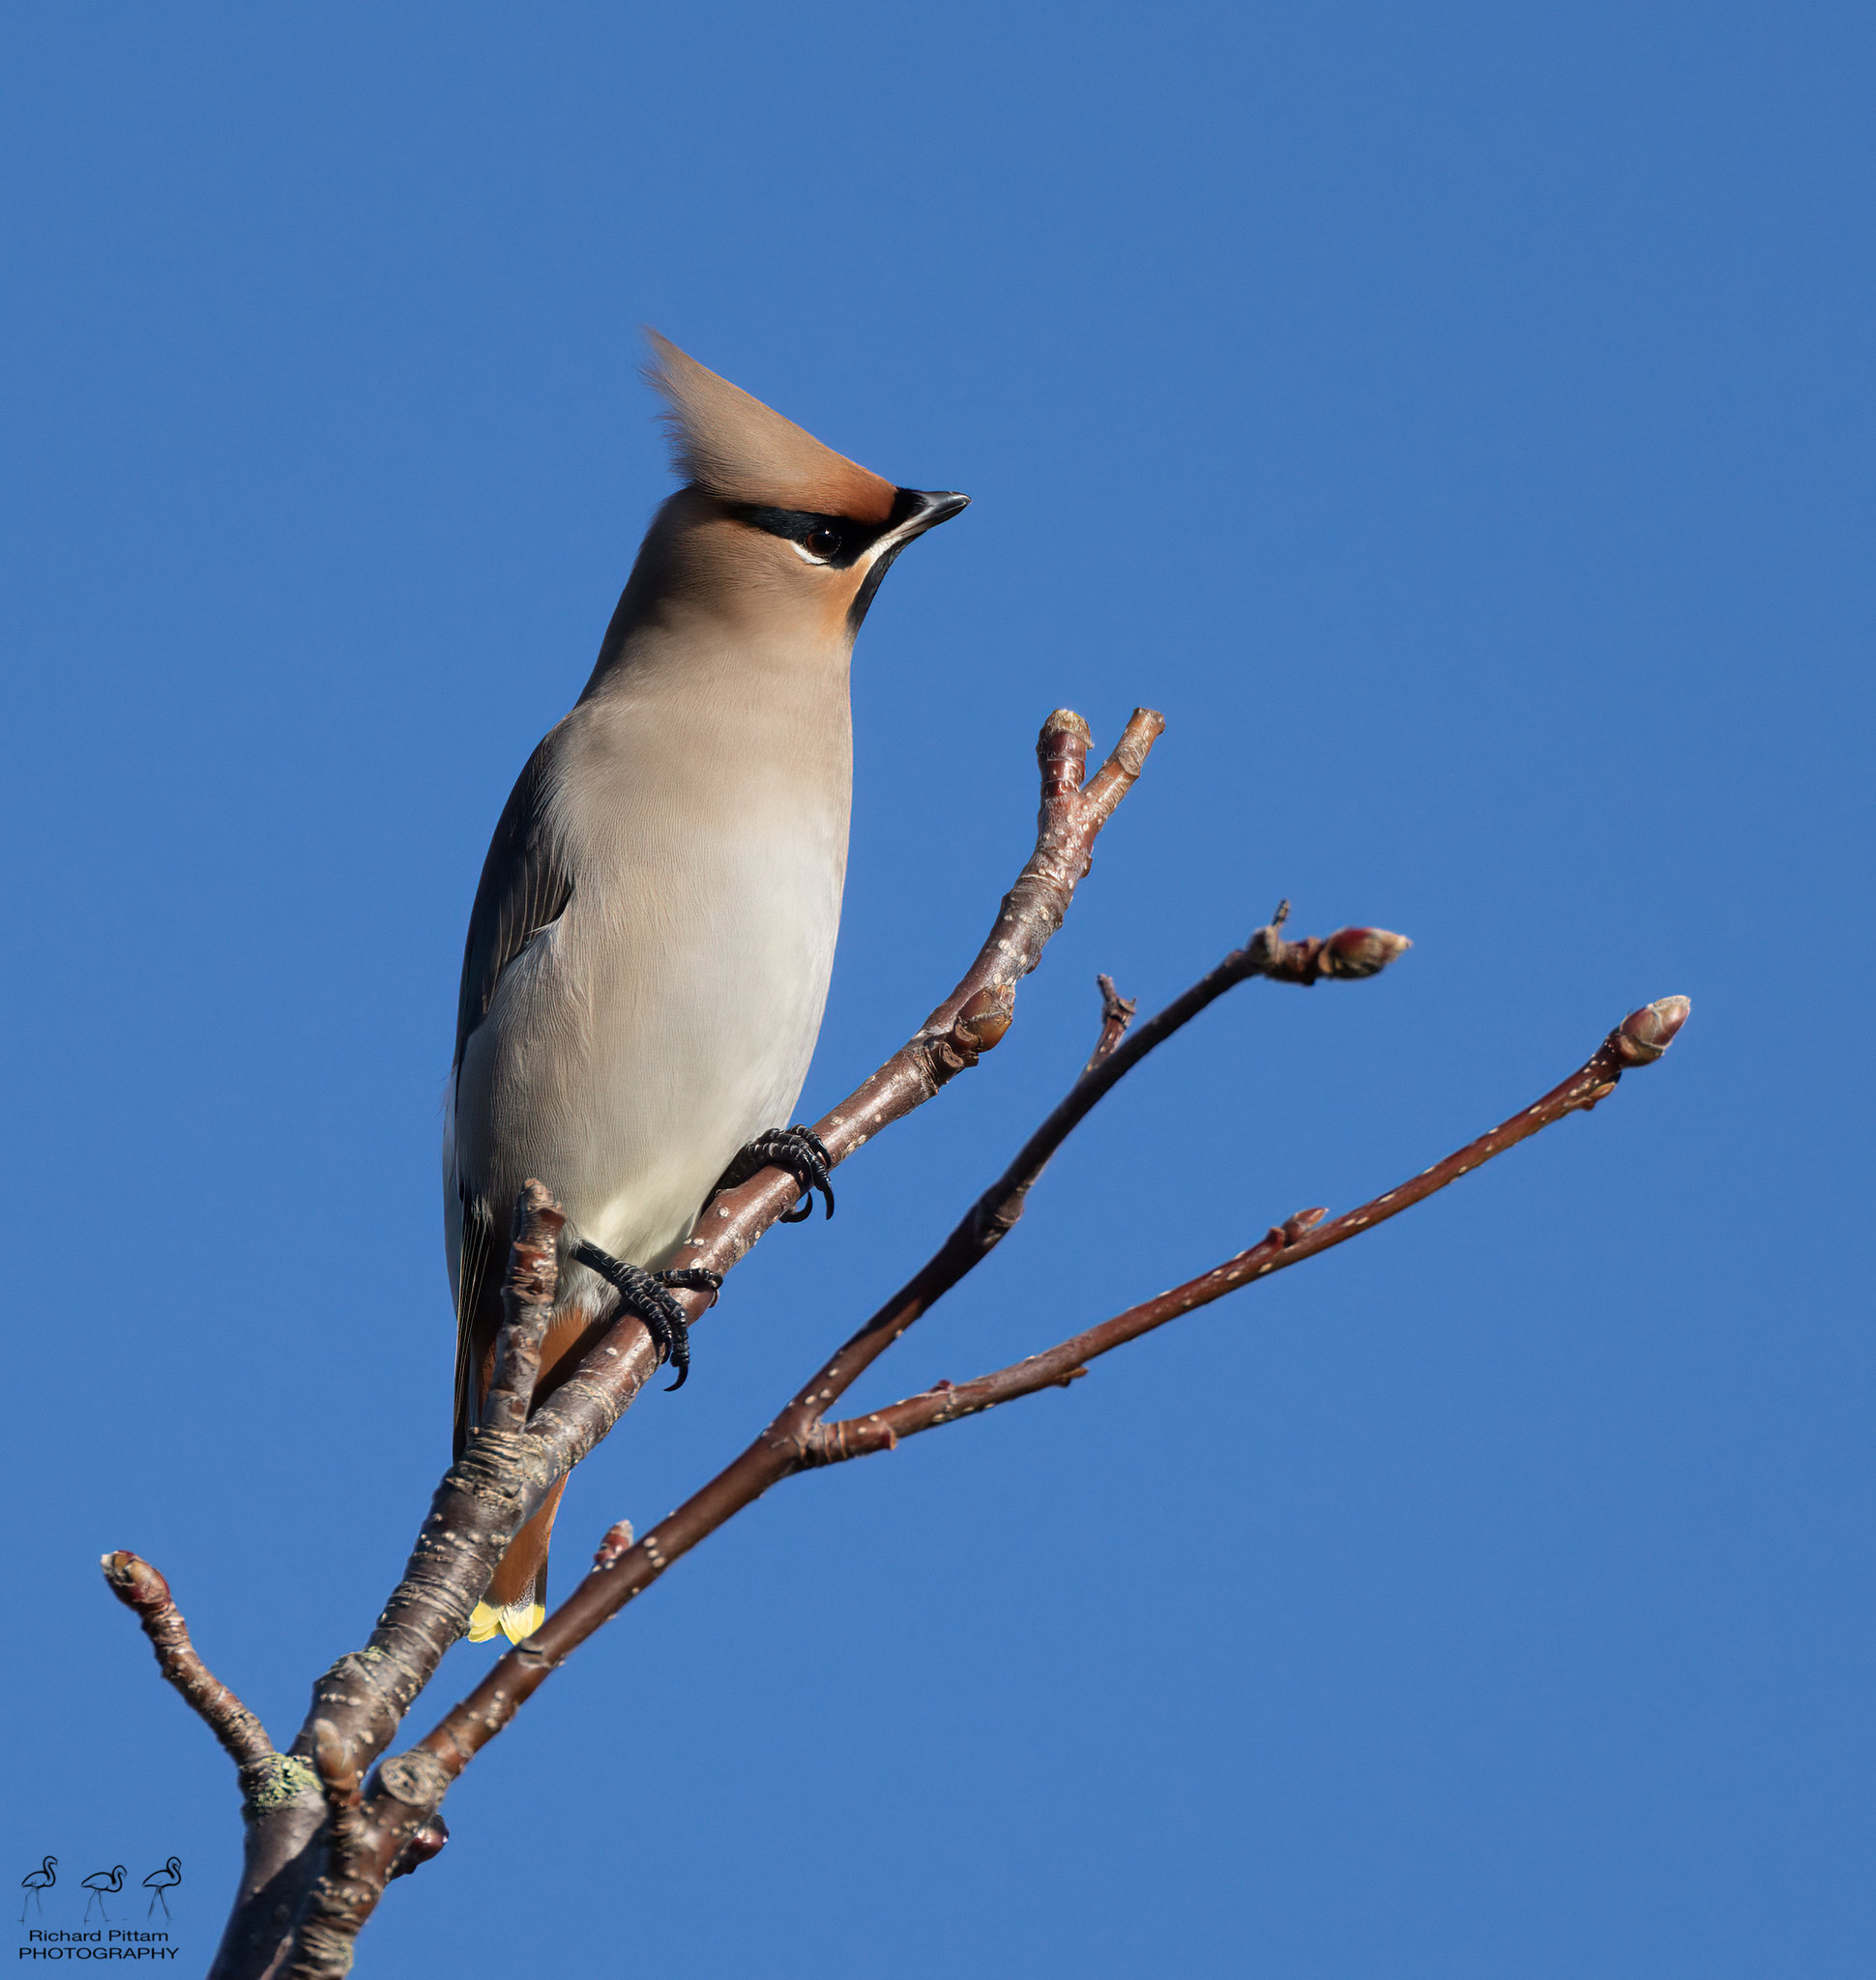 Bohemian Waxwing - a wonderfully-coloured Winter visitor from Scandinavia.